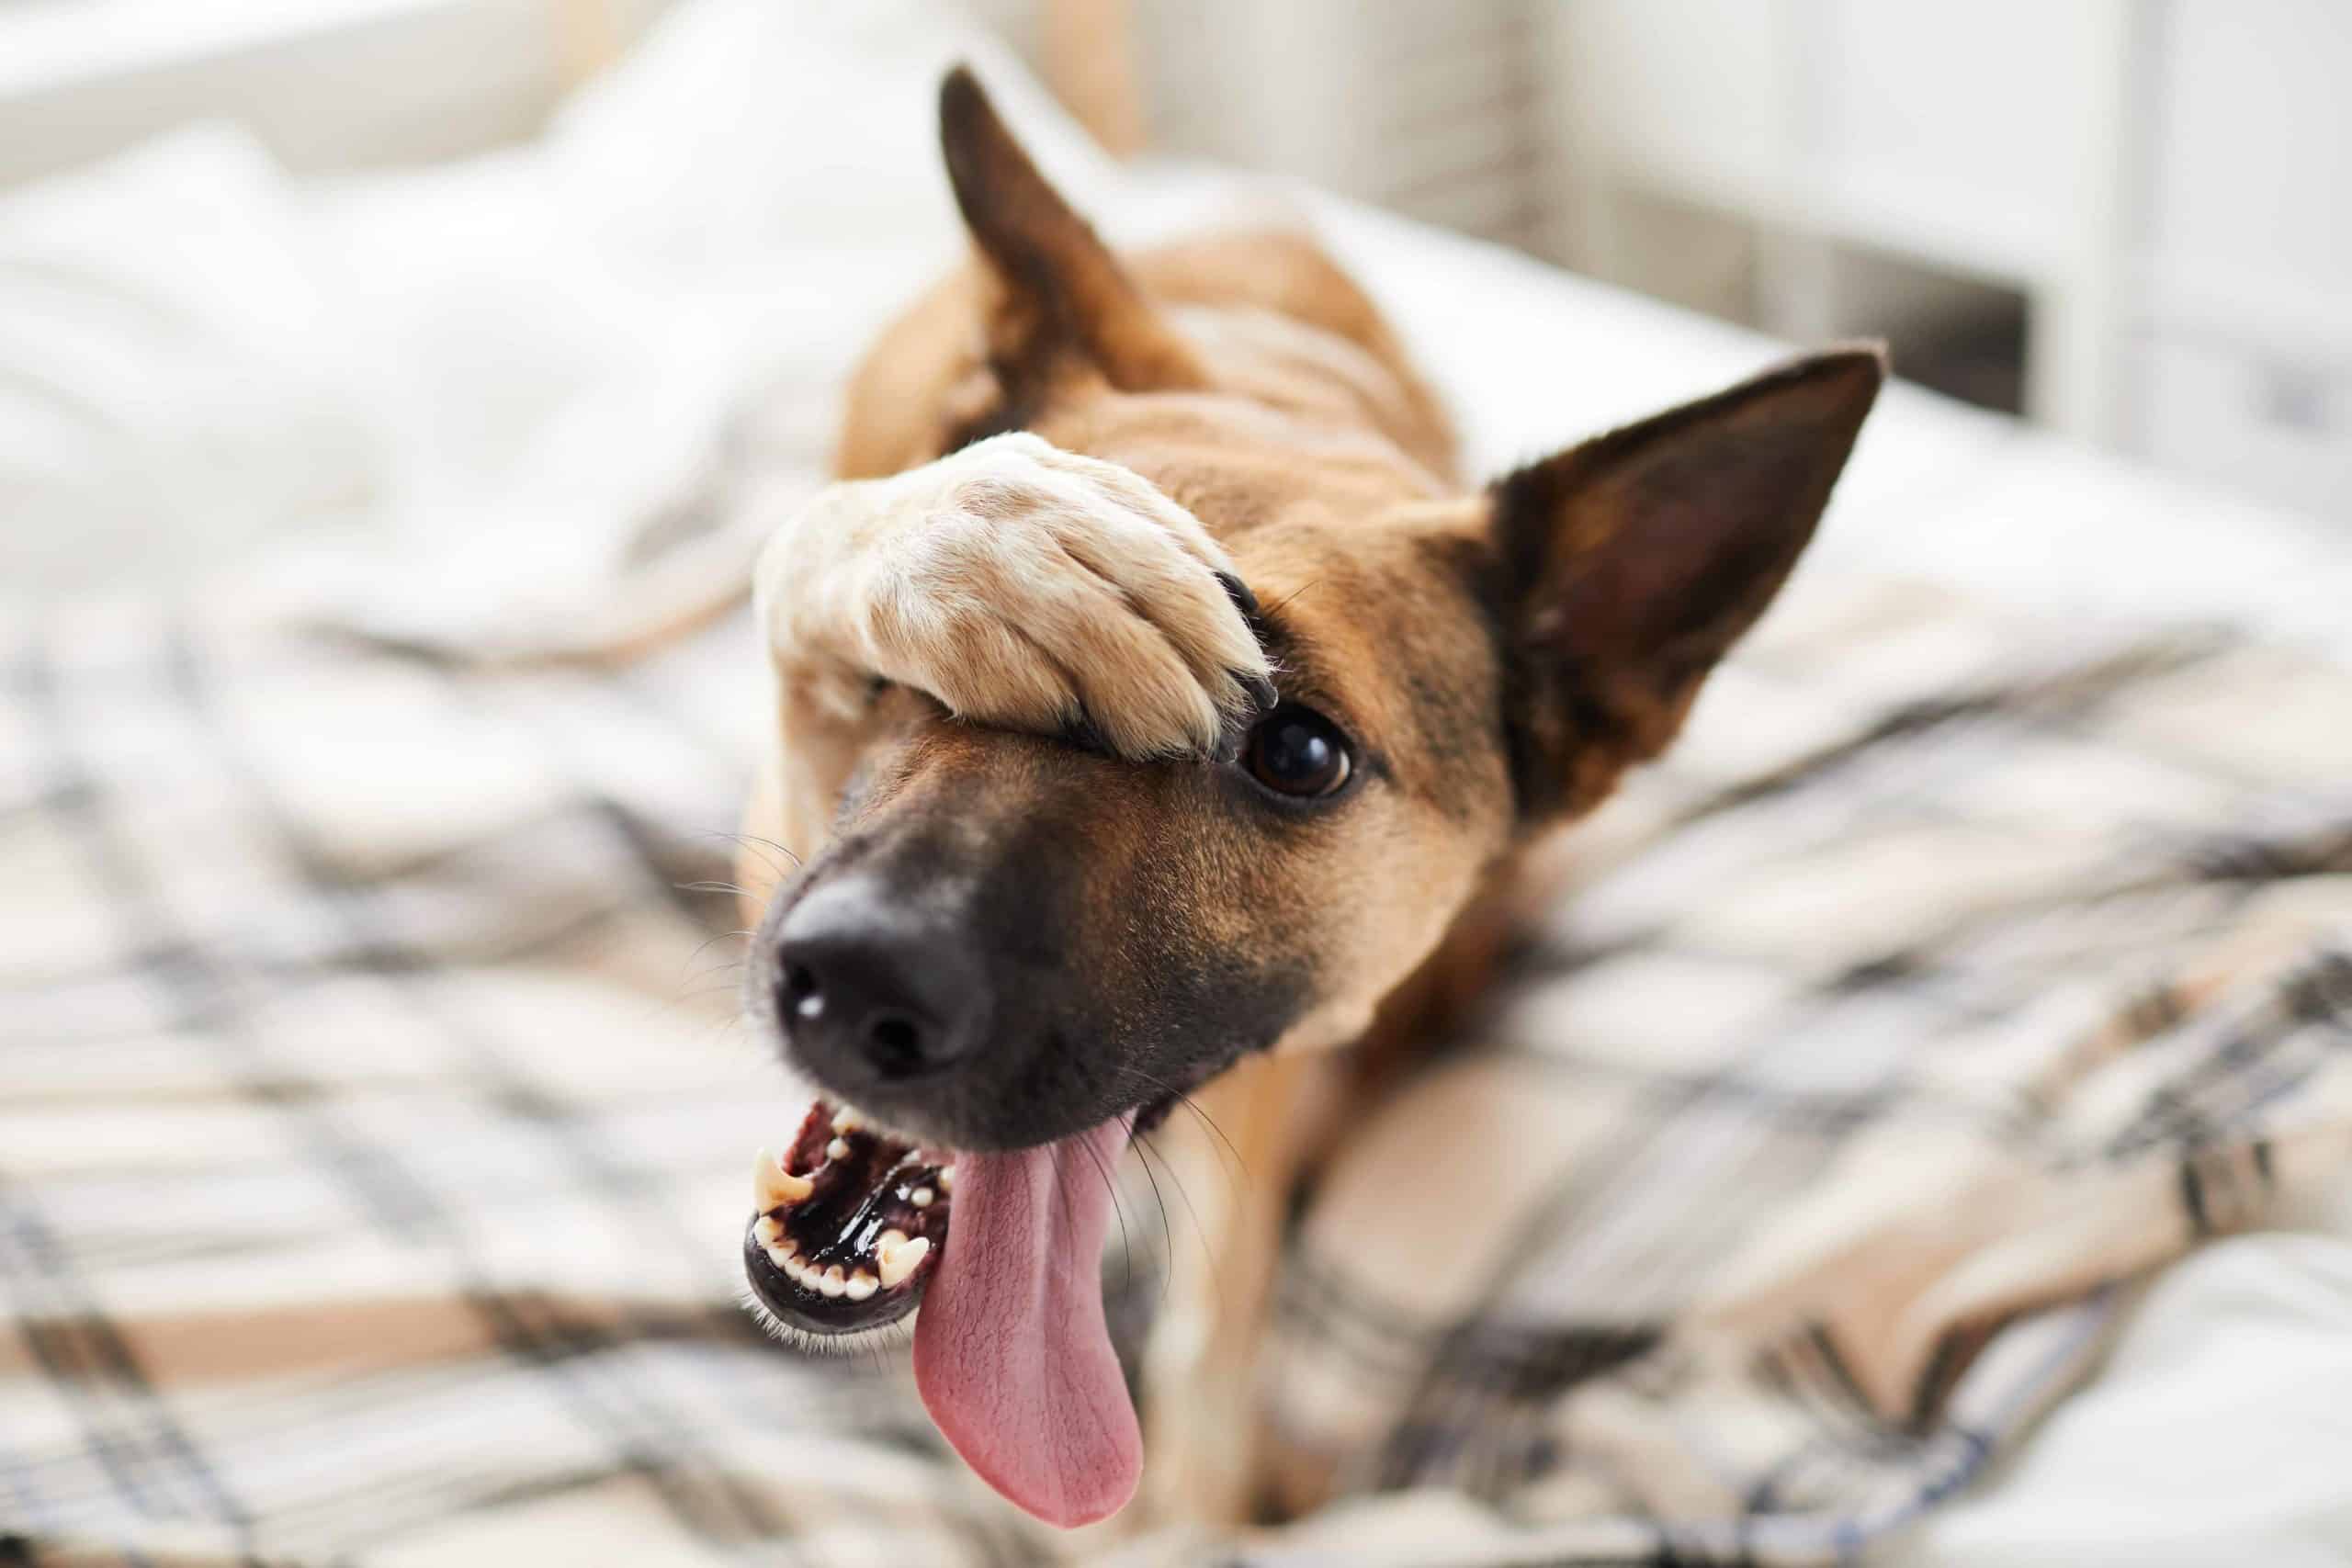 German shepherd puts paw up over face while lying on a bed. Stop dog peeing on the bed by understanding dog behavior. Start dog potty training at an early age and use tools like a dog potty box